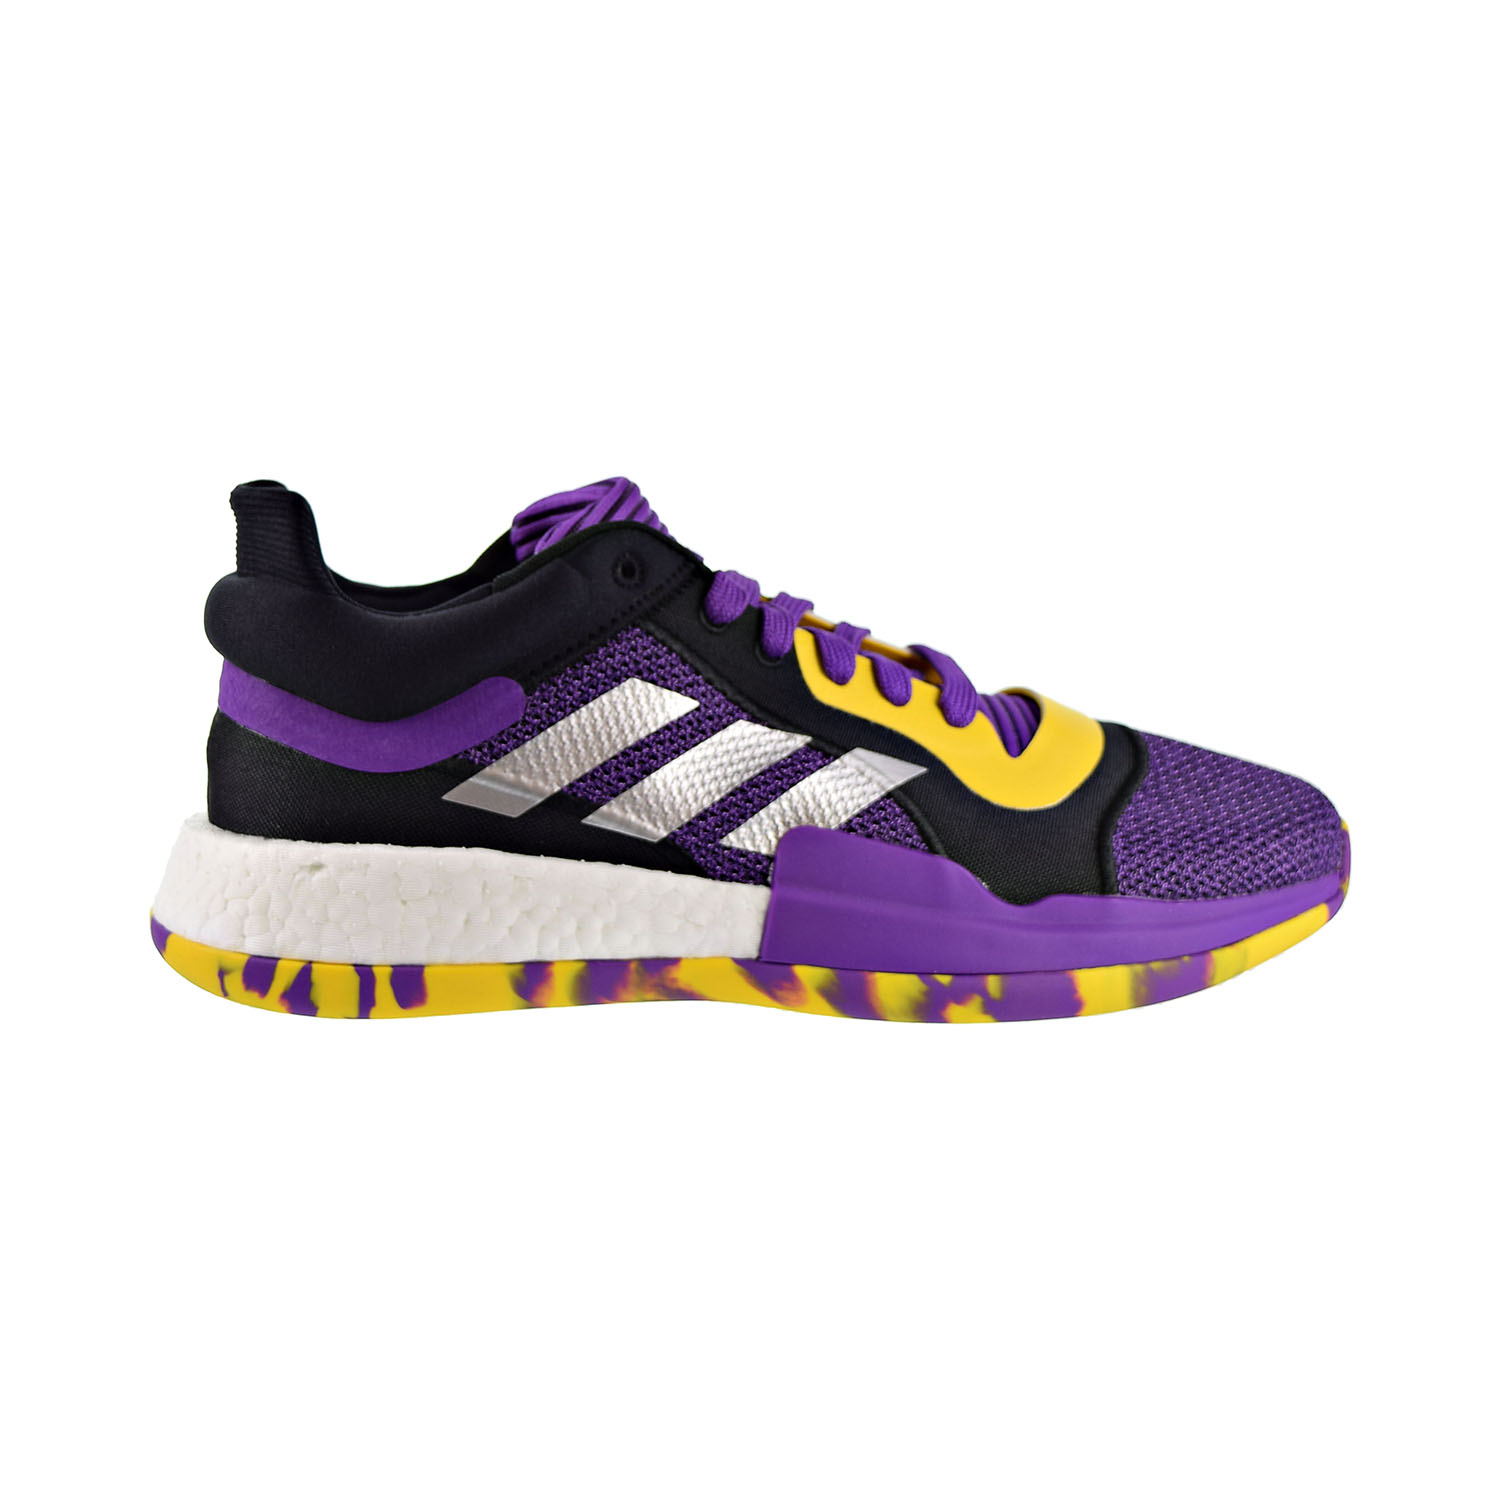 Adidas Marquee Boost Low Men's Shoes 